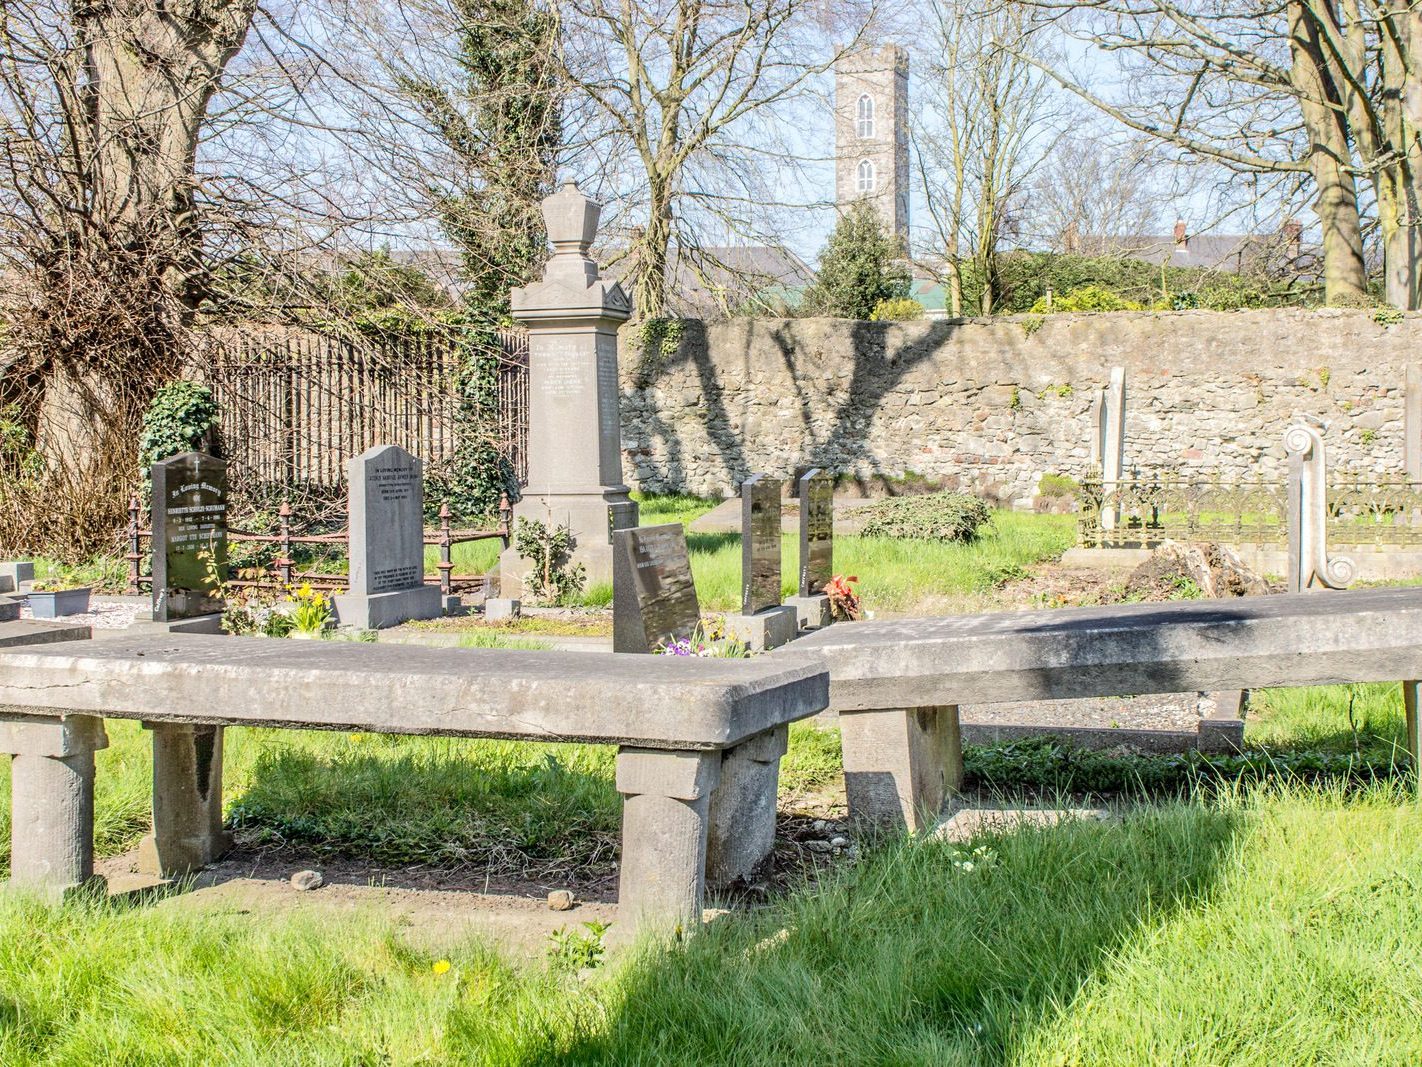 SOME OLD IMAGES OF ST PETERS CHURCHYARD IN DROGHEDA [PHOTOGRAPHED 20212]-224216-1